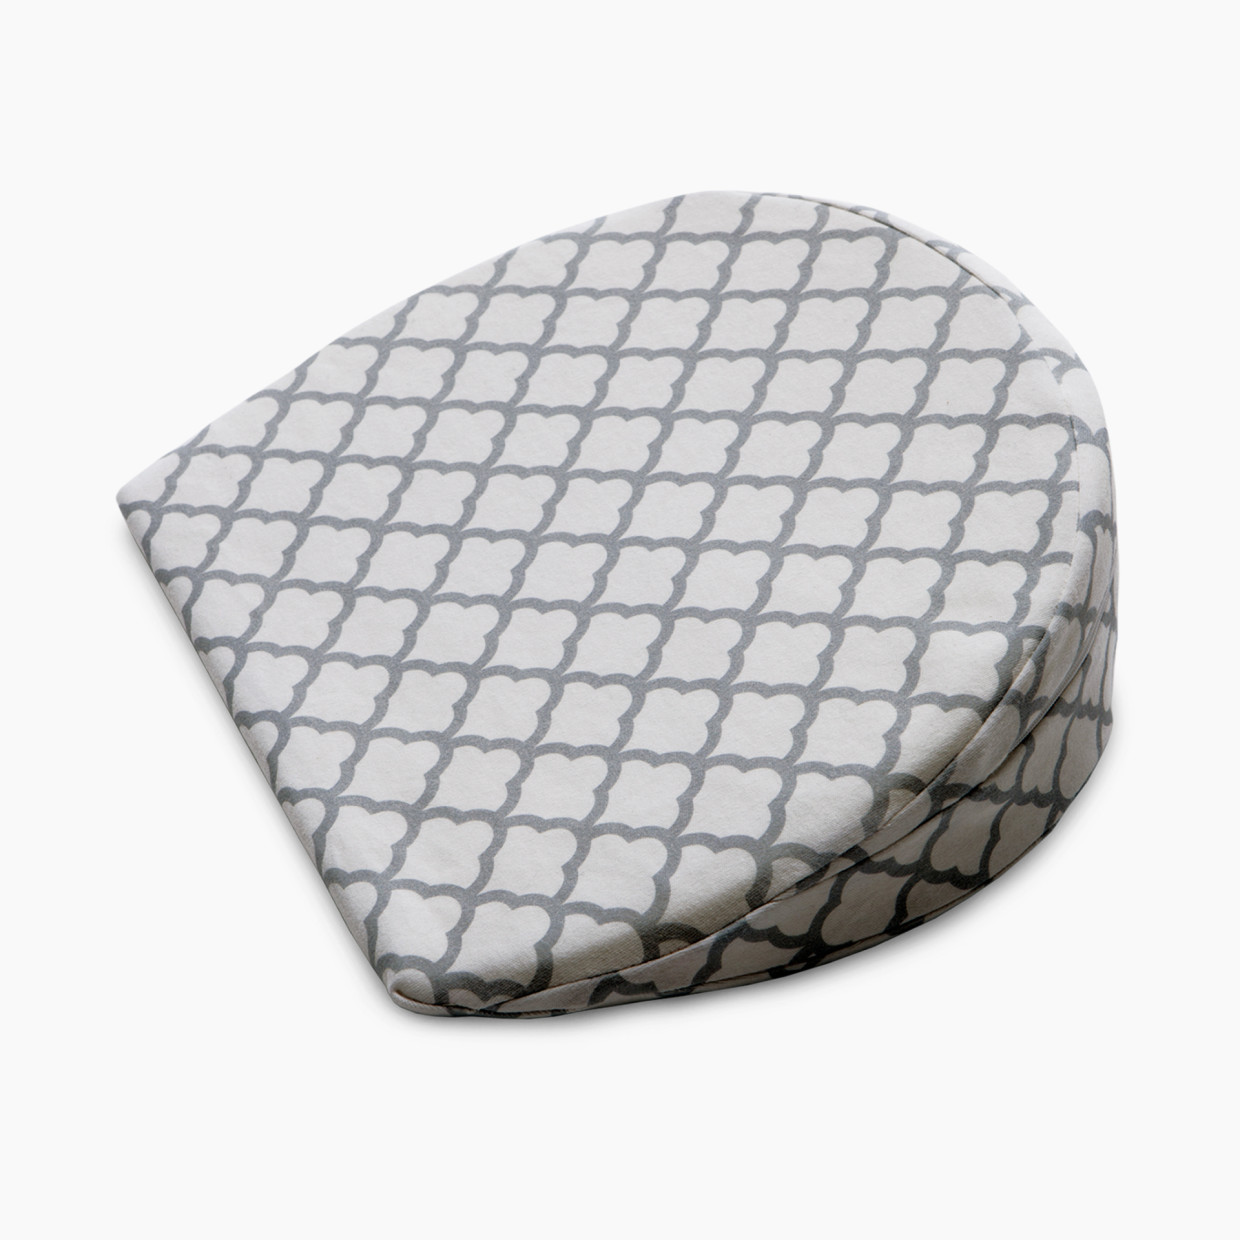 Boppy Pregnancy Support Wedge with Removable Pillow Cover - Scallop Trellis White.